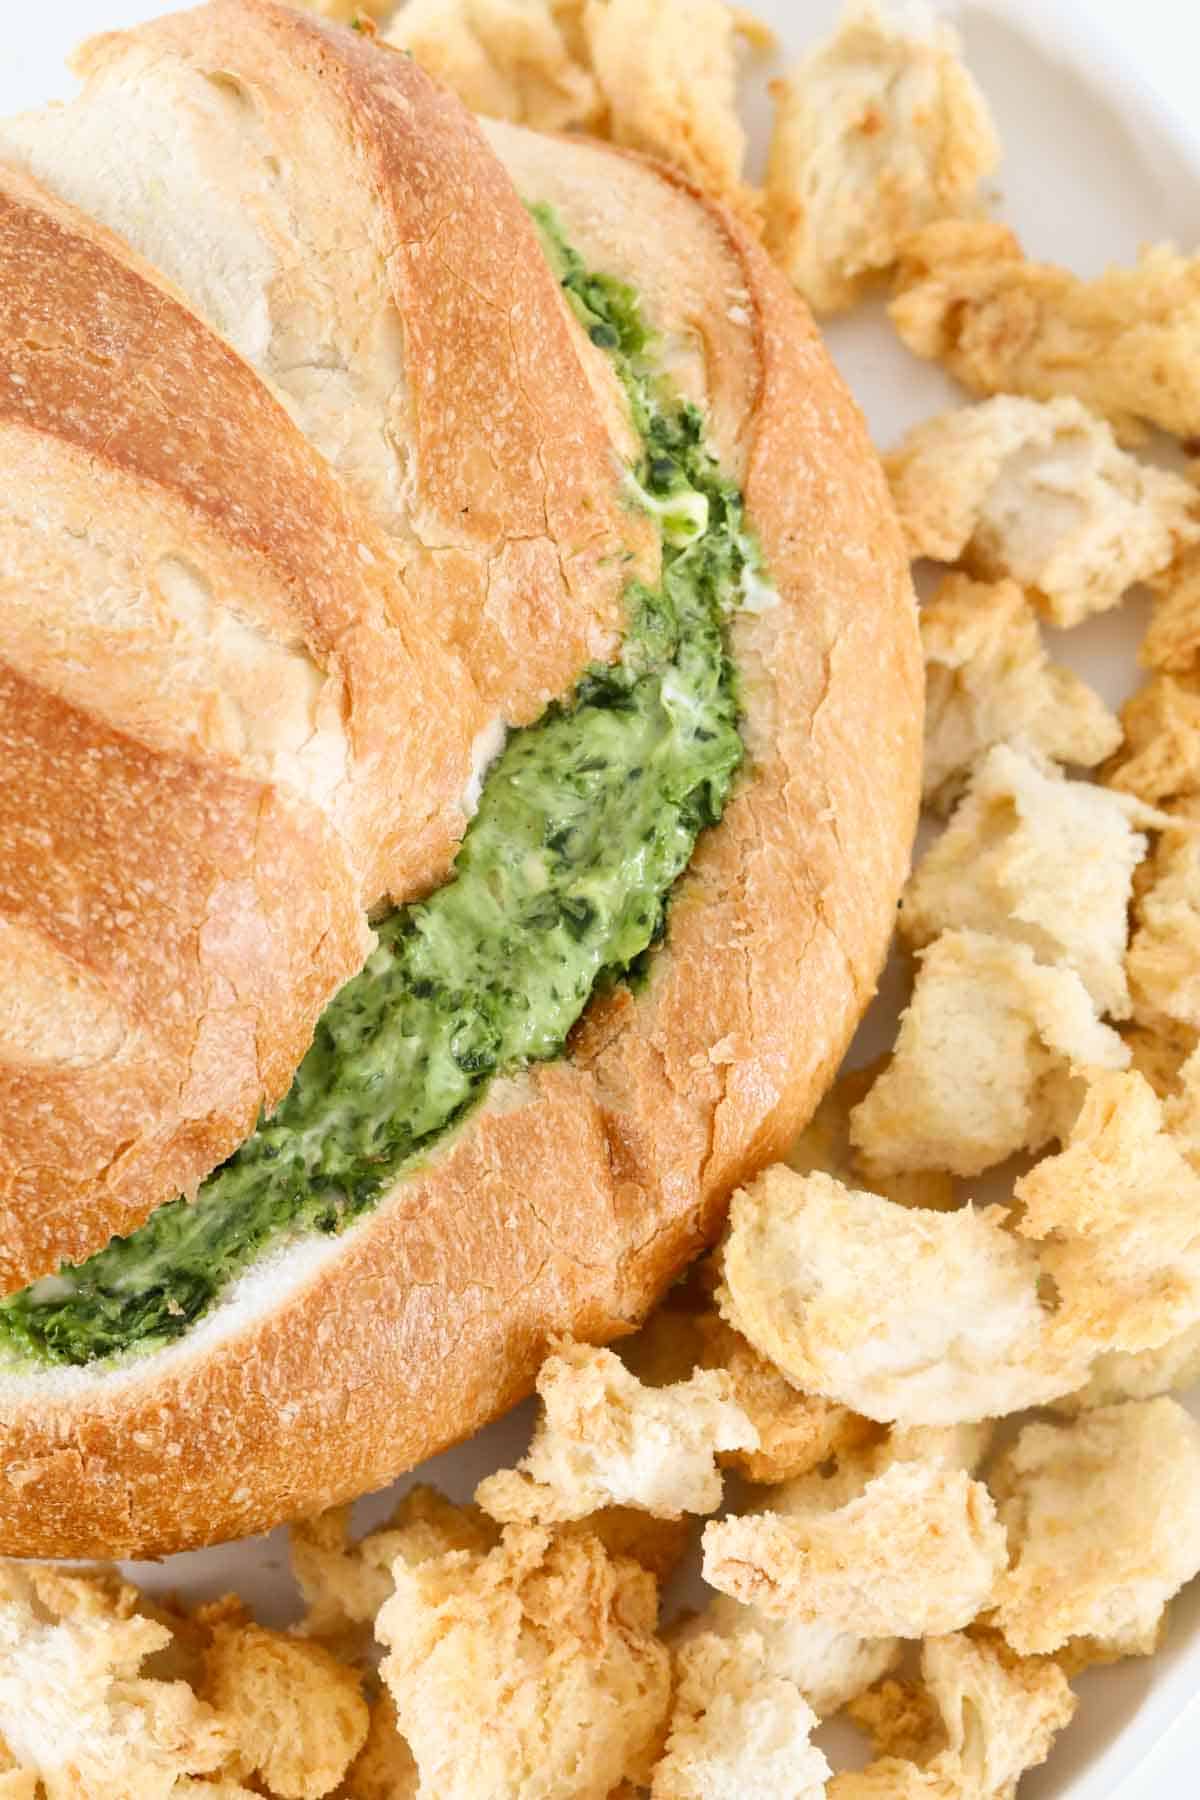 A bread loaf filled with dip and surrounded by small pieces of bread.